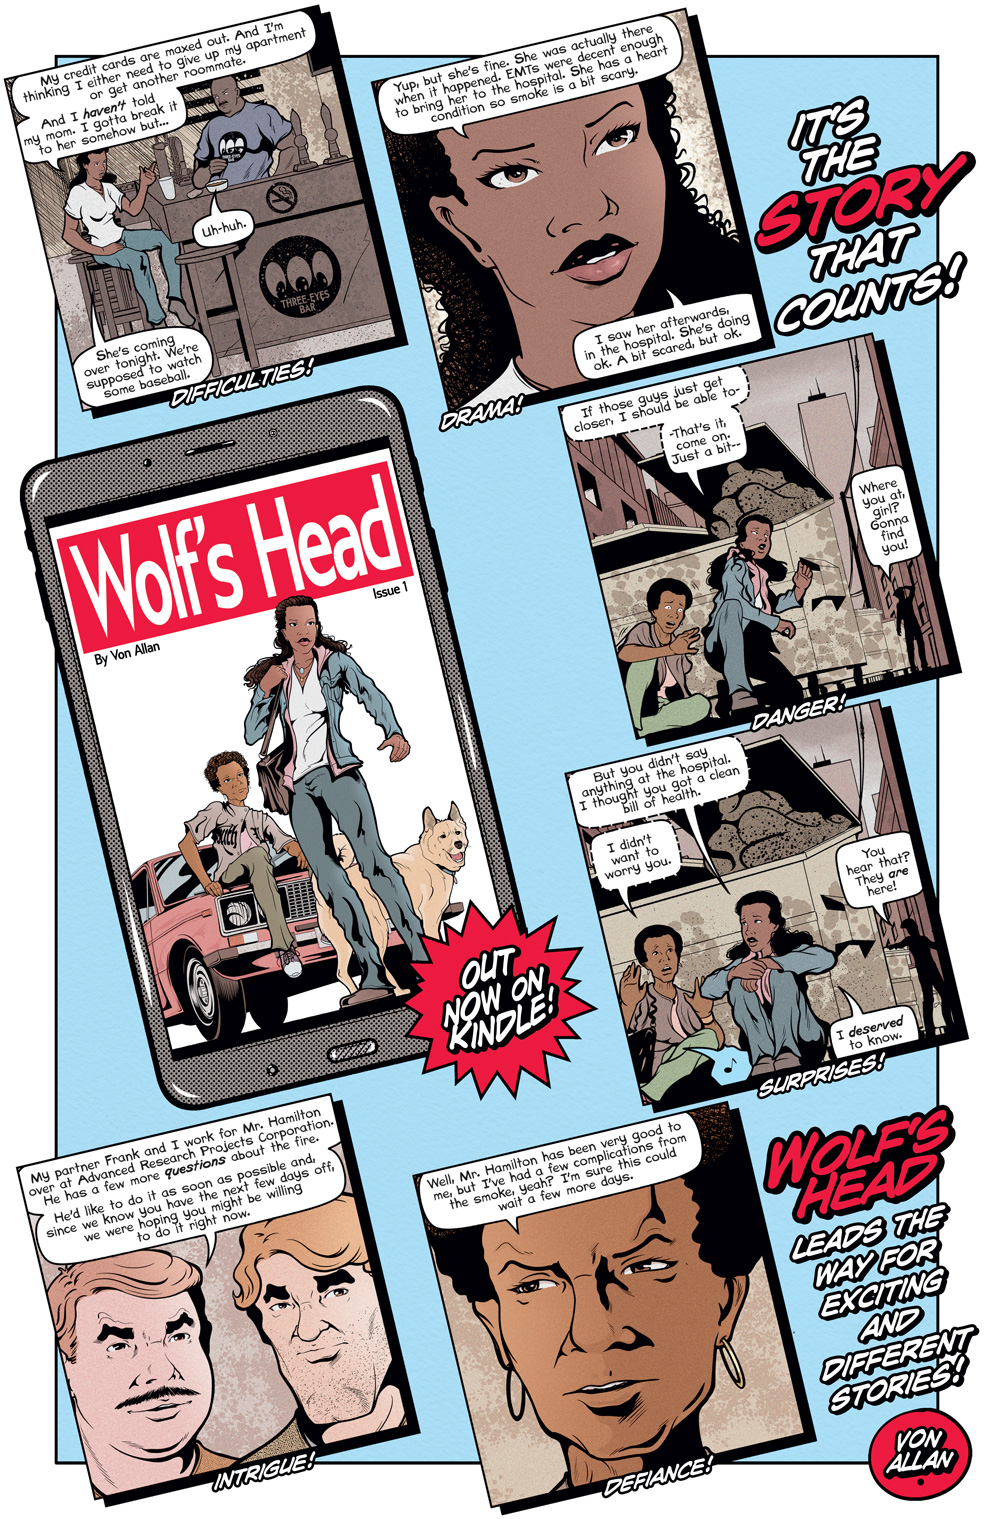 Teaser image for Wolf's Head issue 1 on Kindle